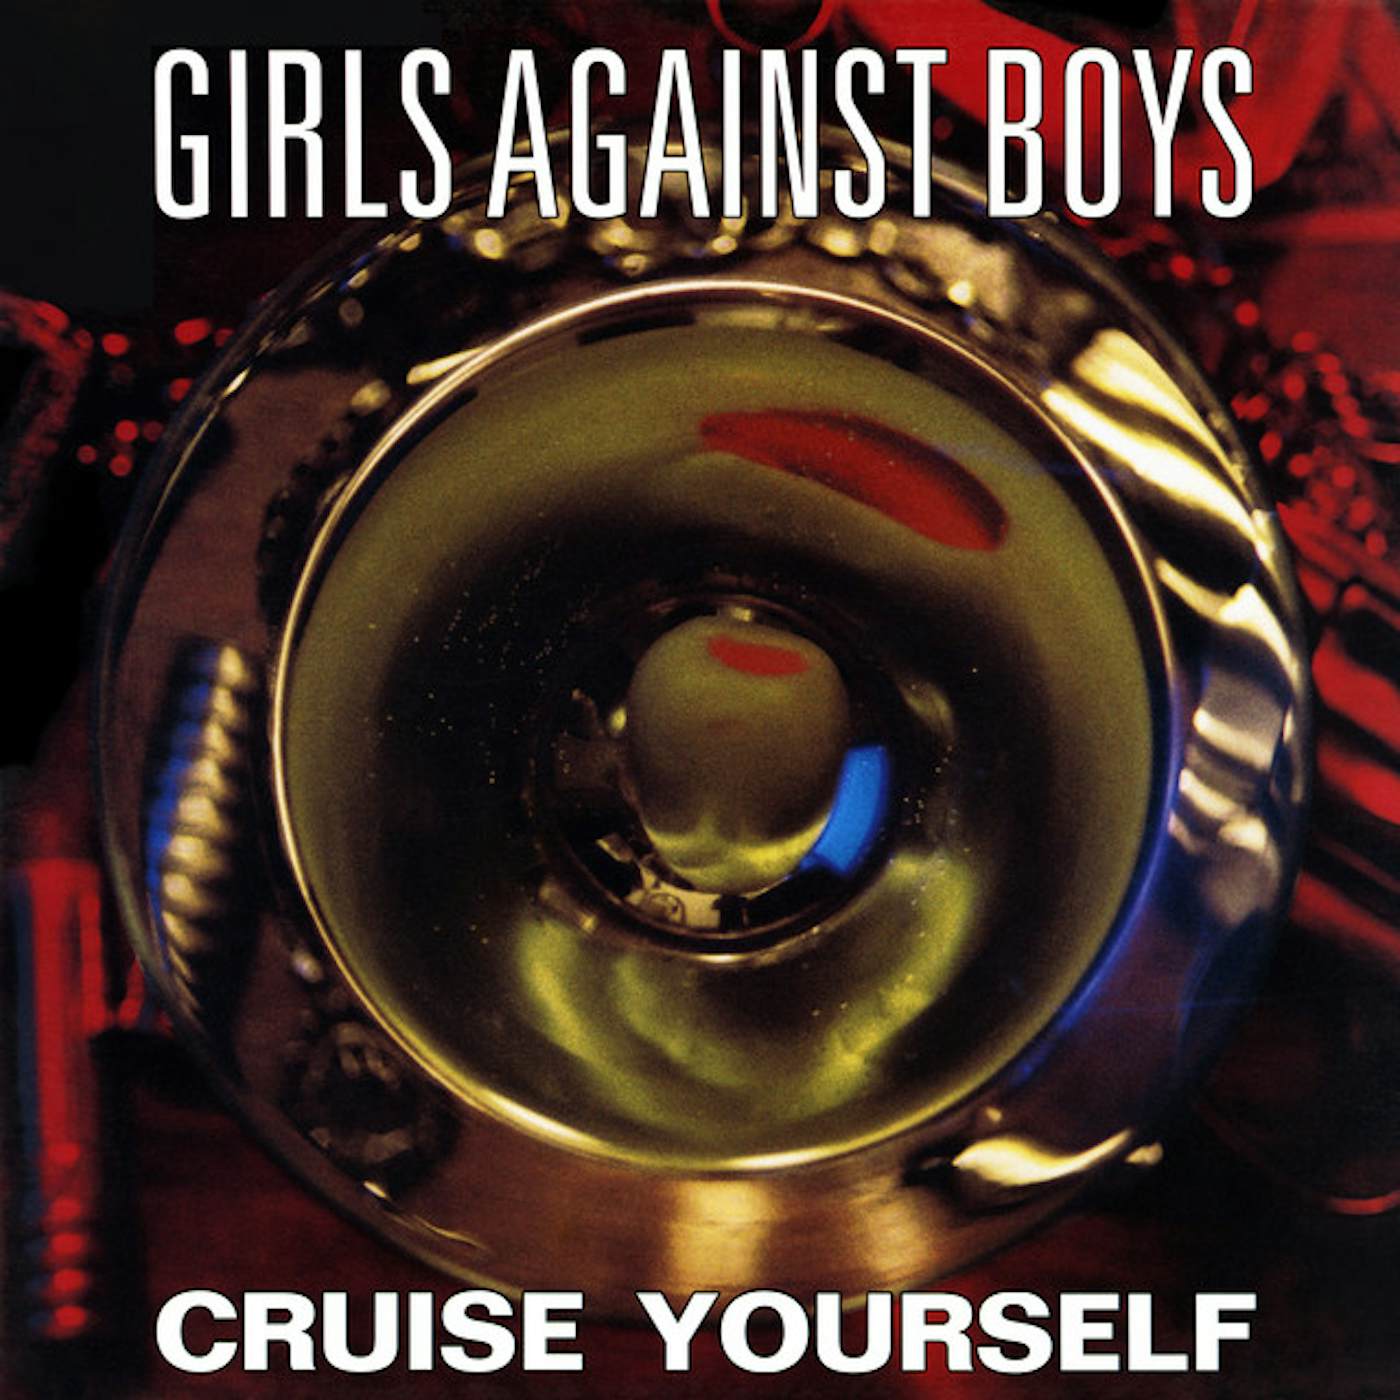 Girls Against Boys Cruise Yourself Vinyl Record